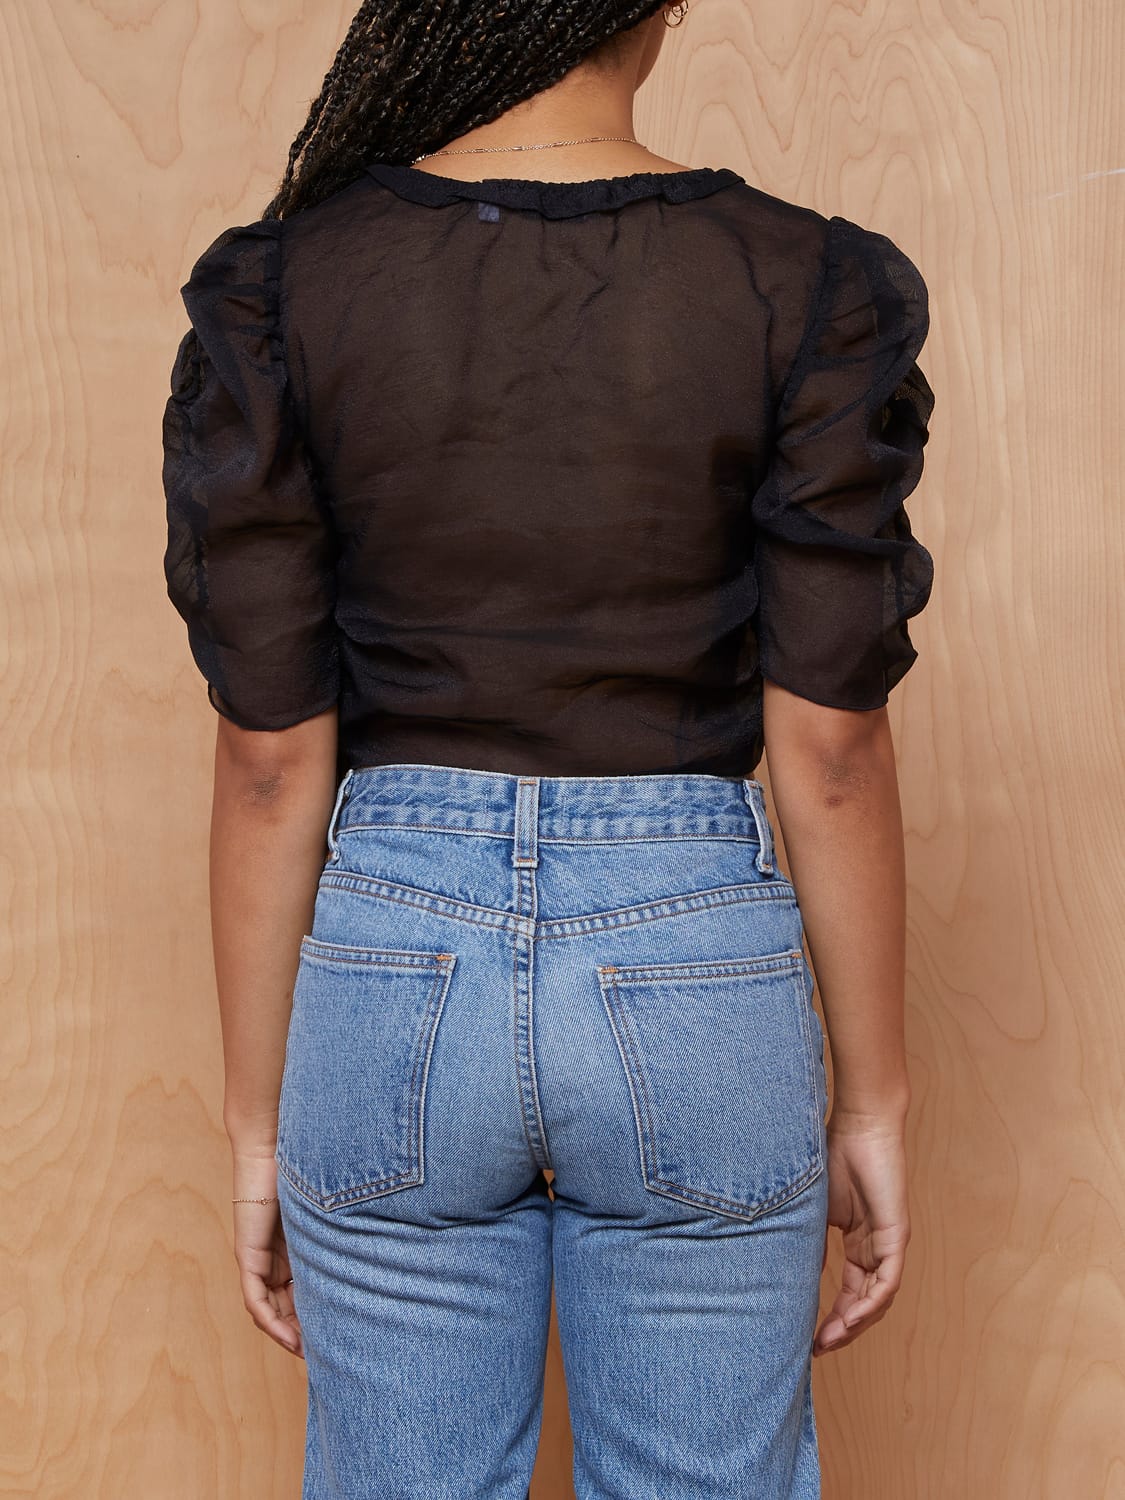 & Other Stories Sheer Black Button Up Crop Top